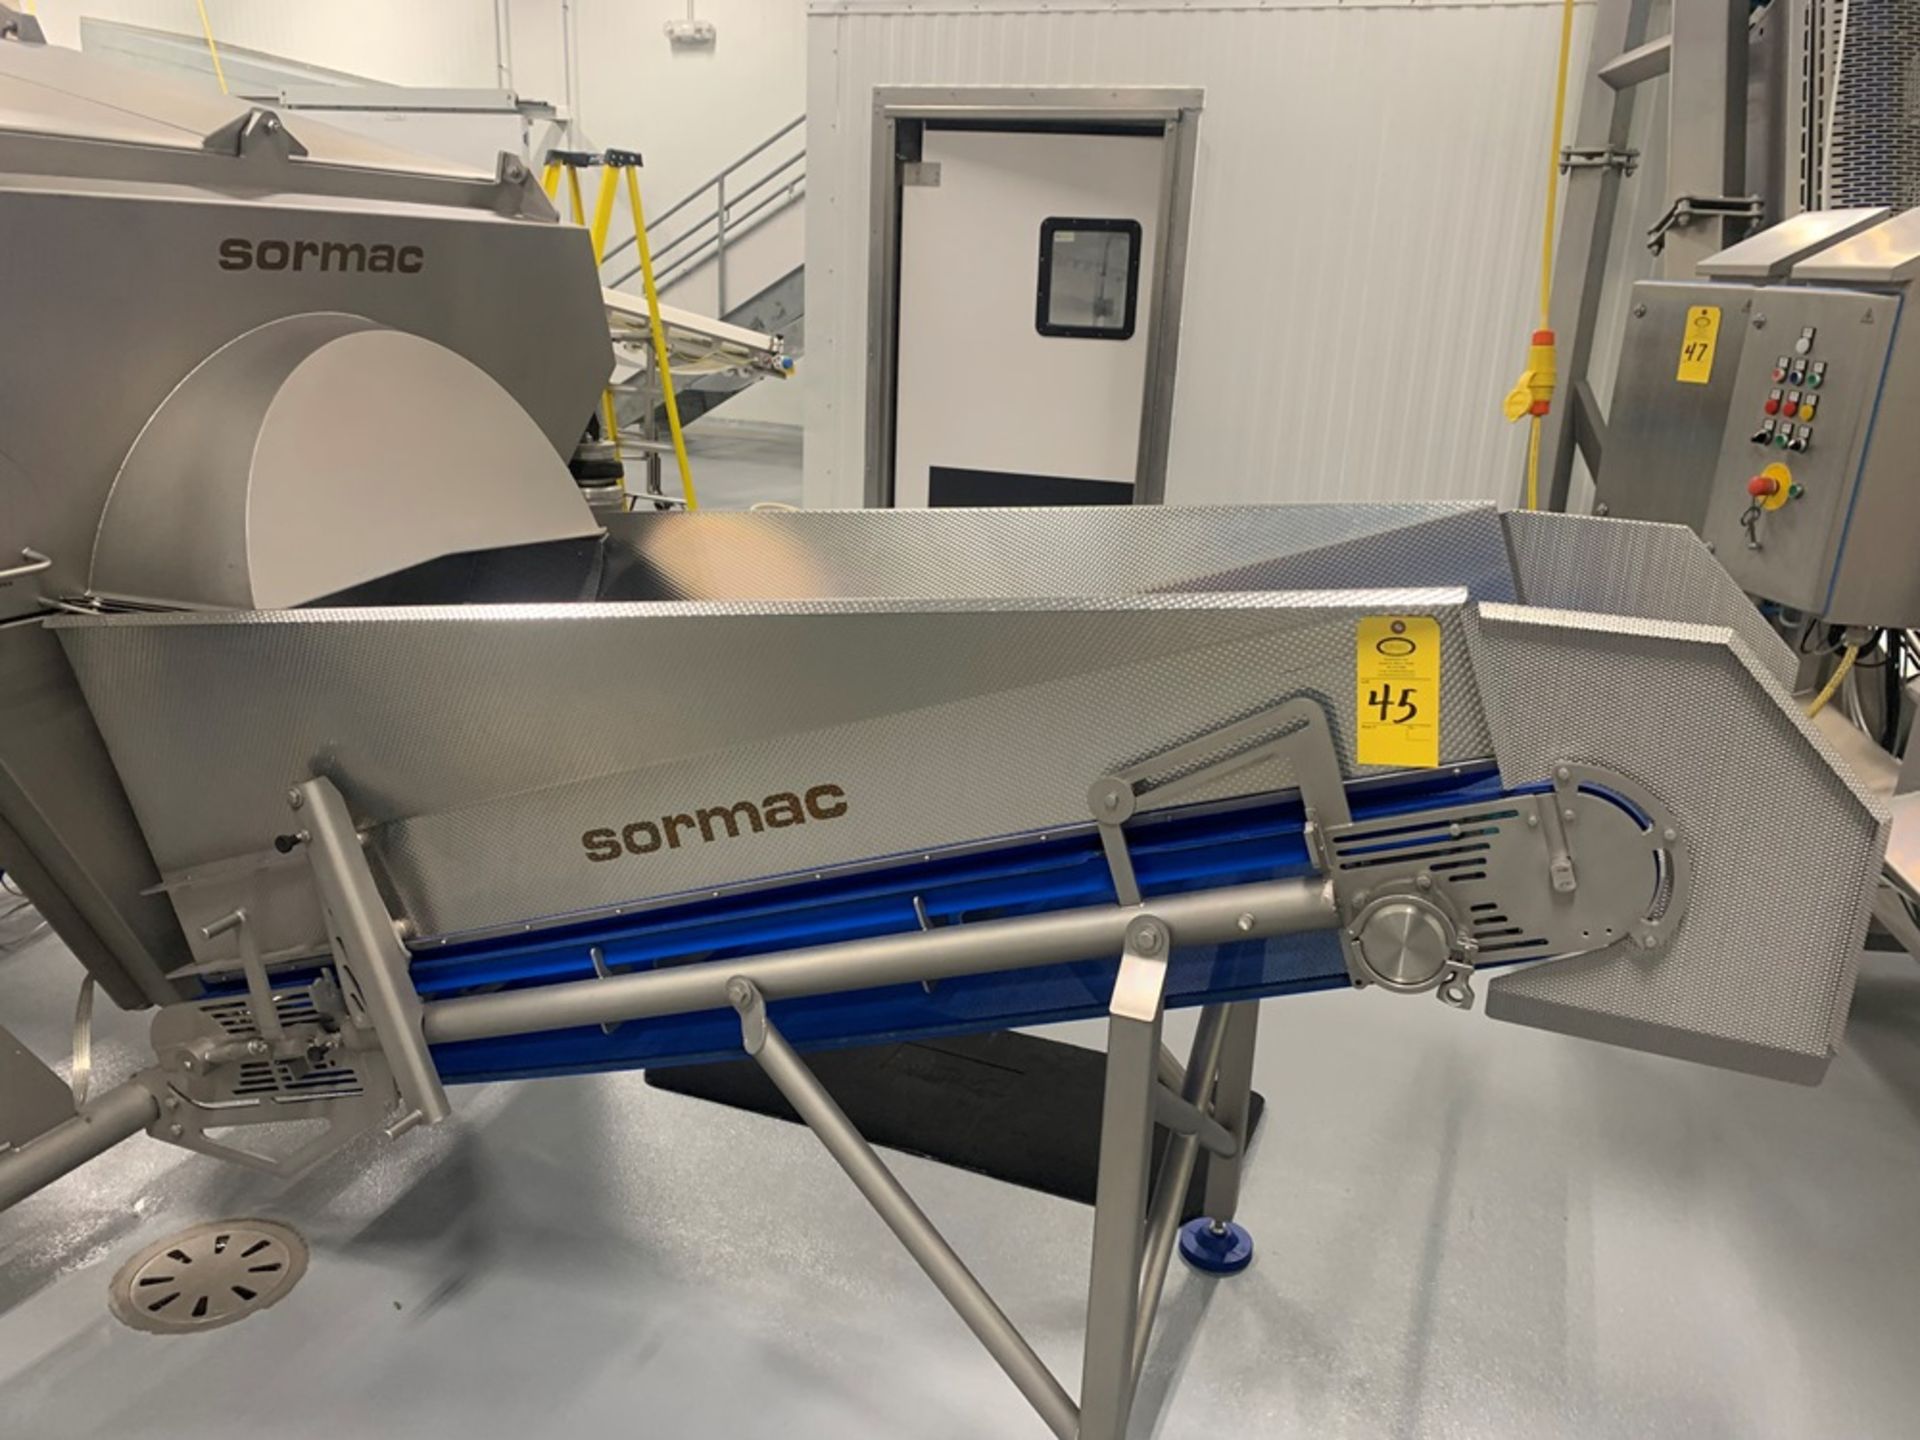 Sormac Cleaning and Drying System, Sormac Mdl. 180950/10S-PS 70/50/010 Washing System , Mfg. 2018, - Image 28 of 41